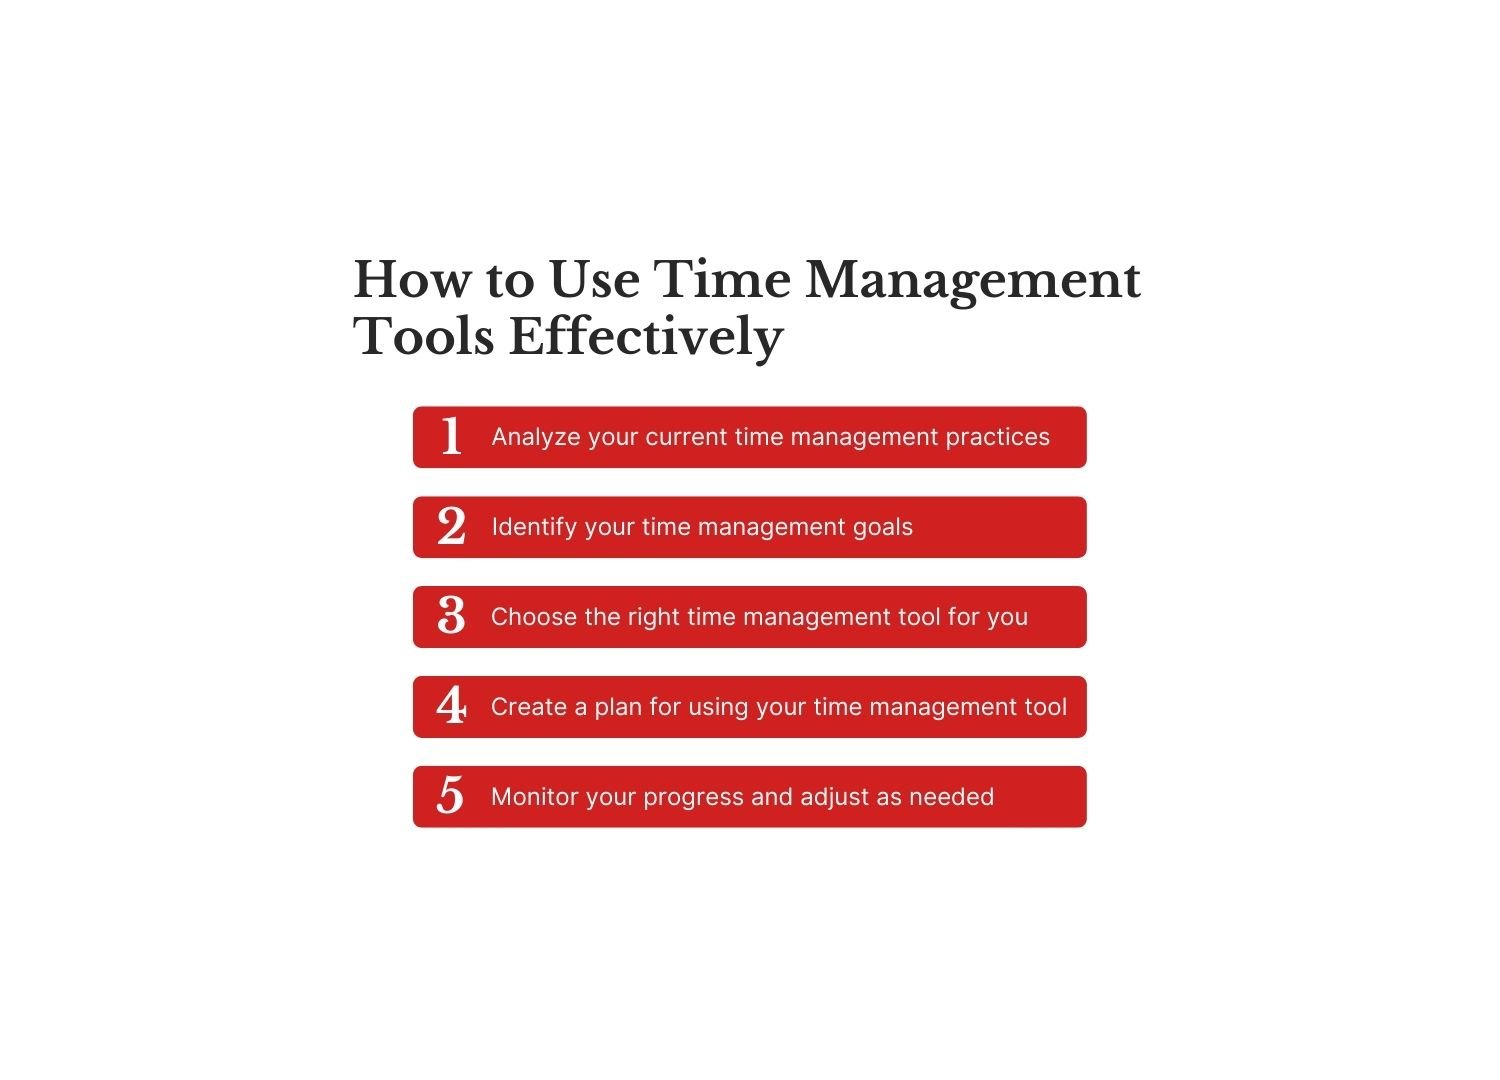 Infographic showing five steps to use time management tools effectively.